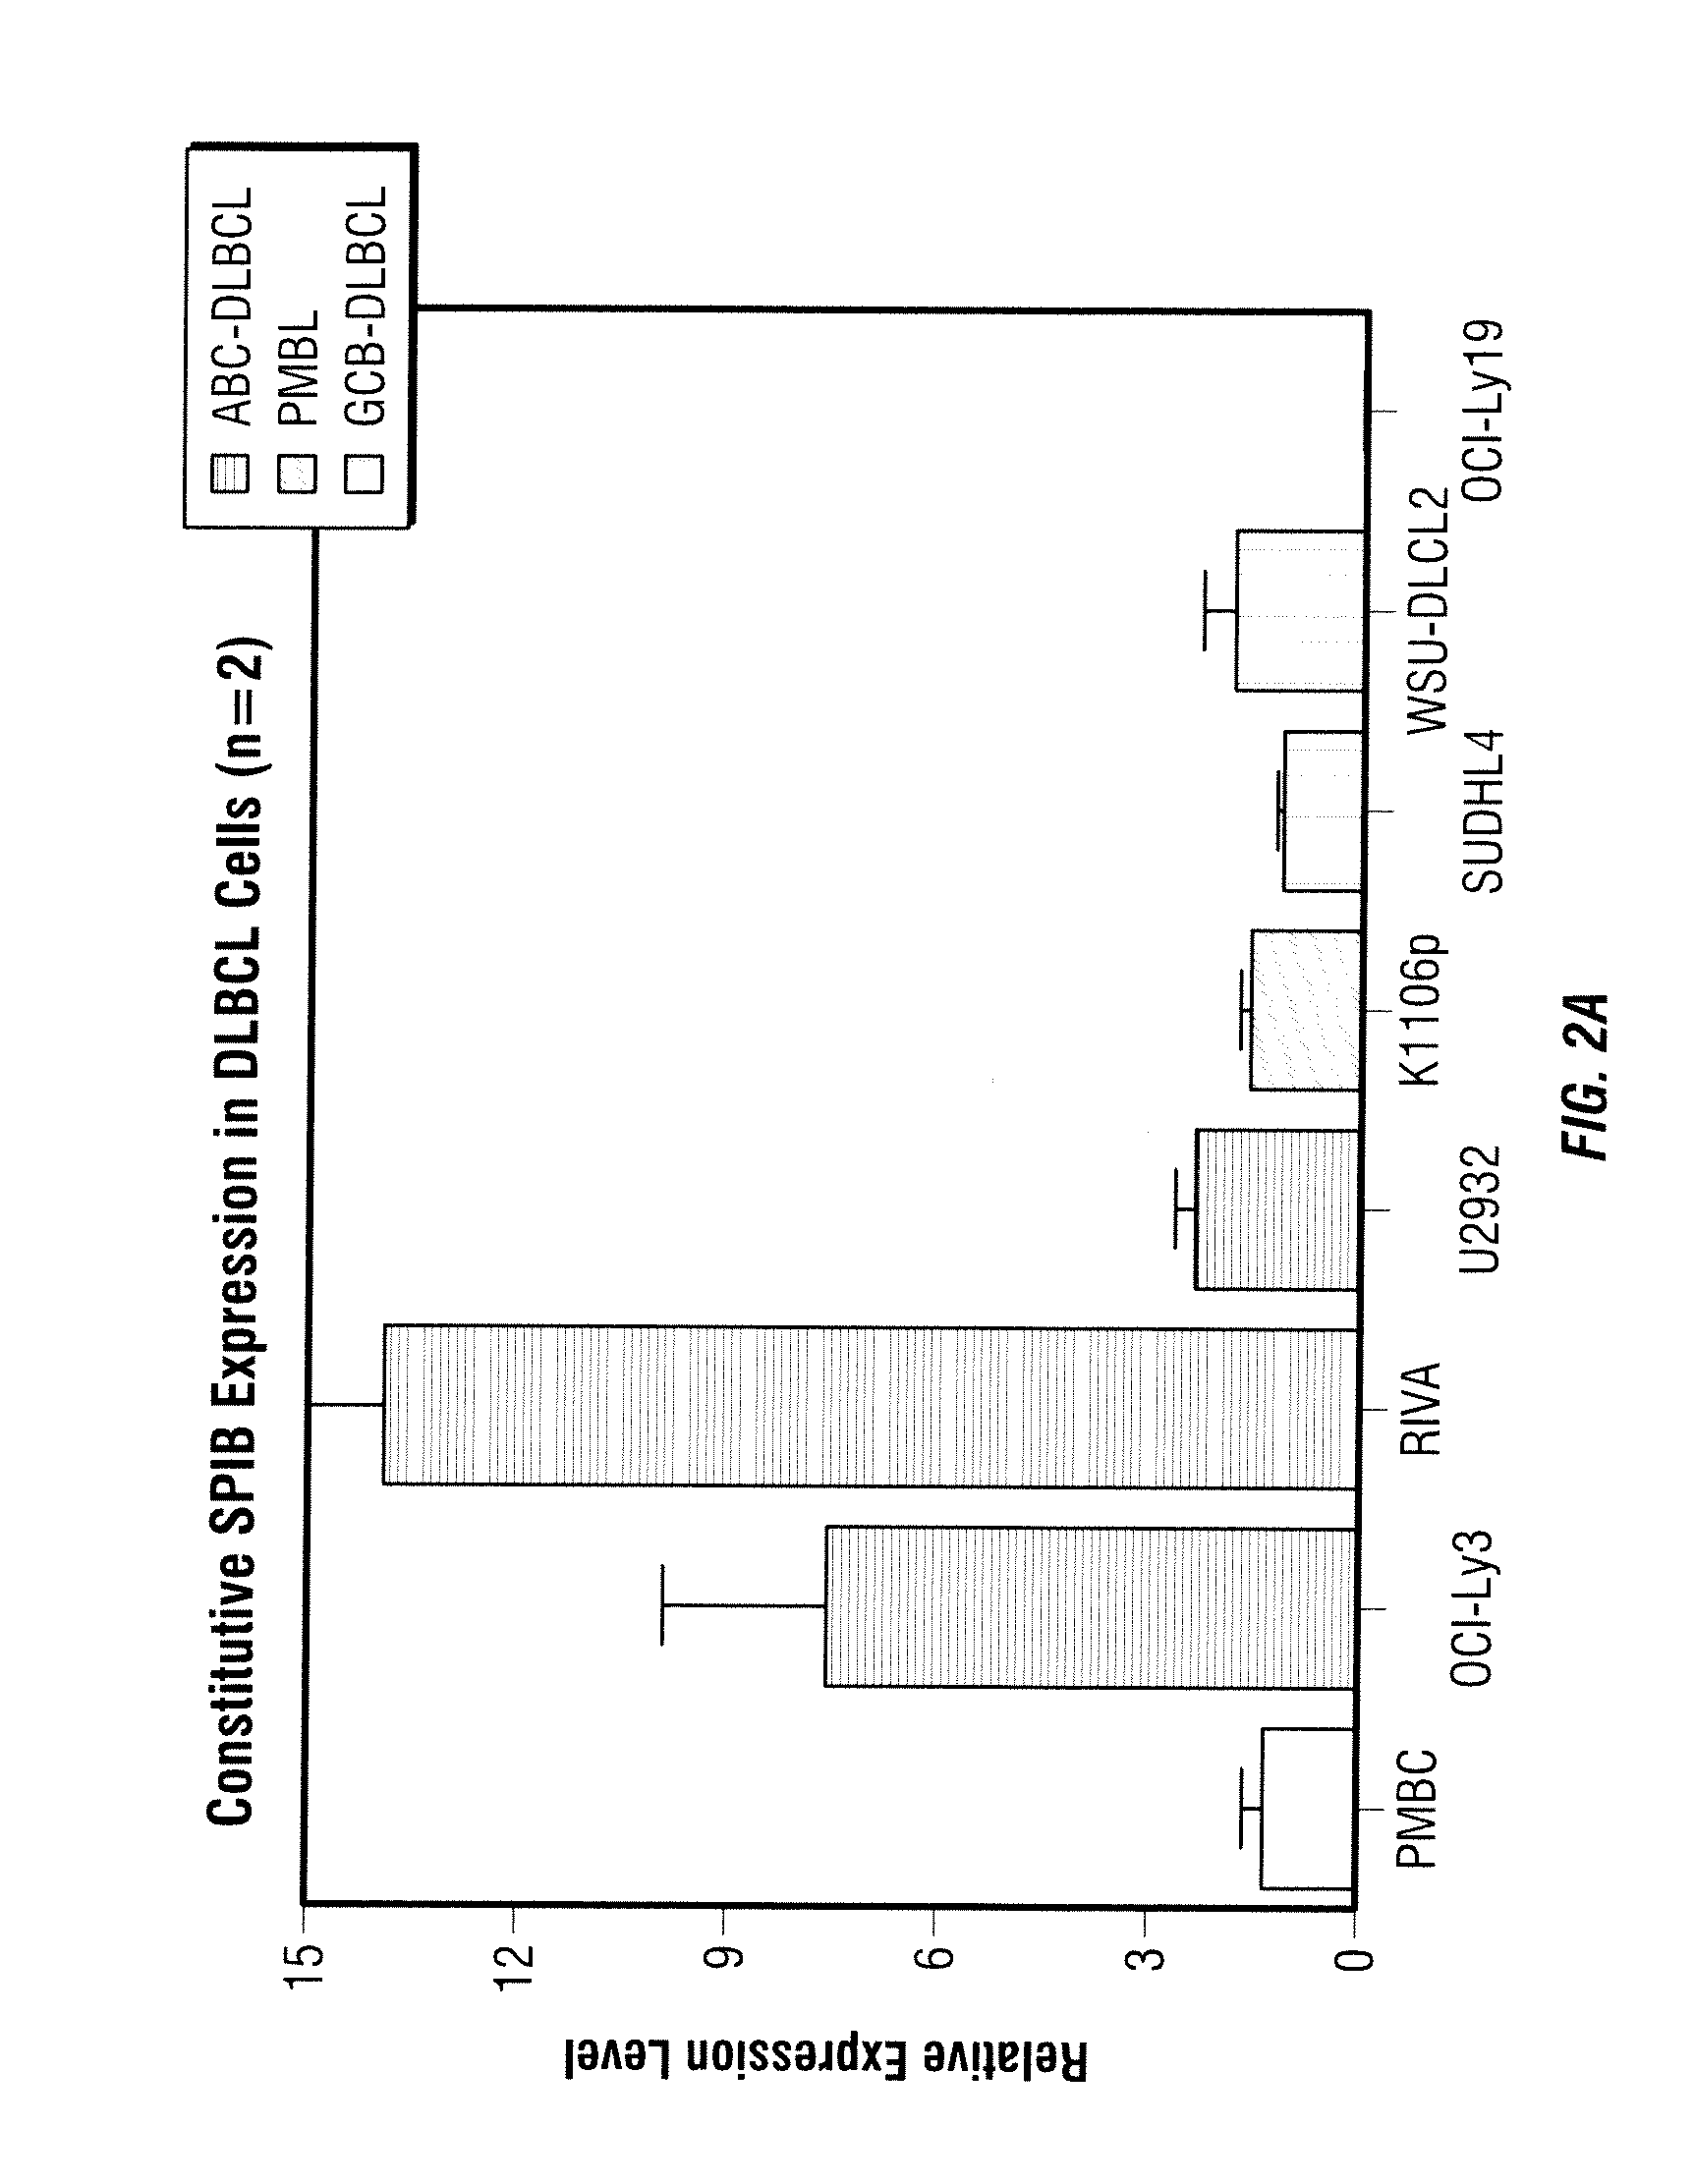 Methods for the treatment of non-hodgkin's lymphomas using lenalidomide, and gene and protein biomarkers as a predictor